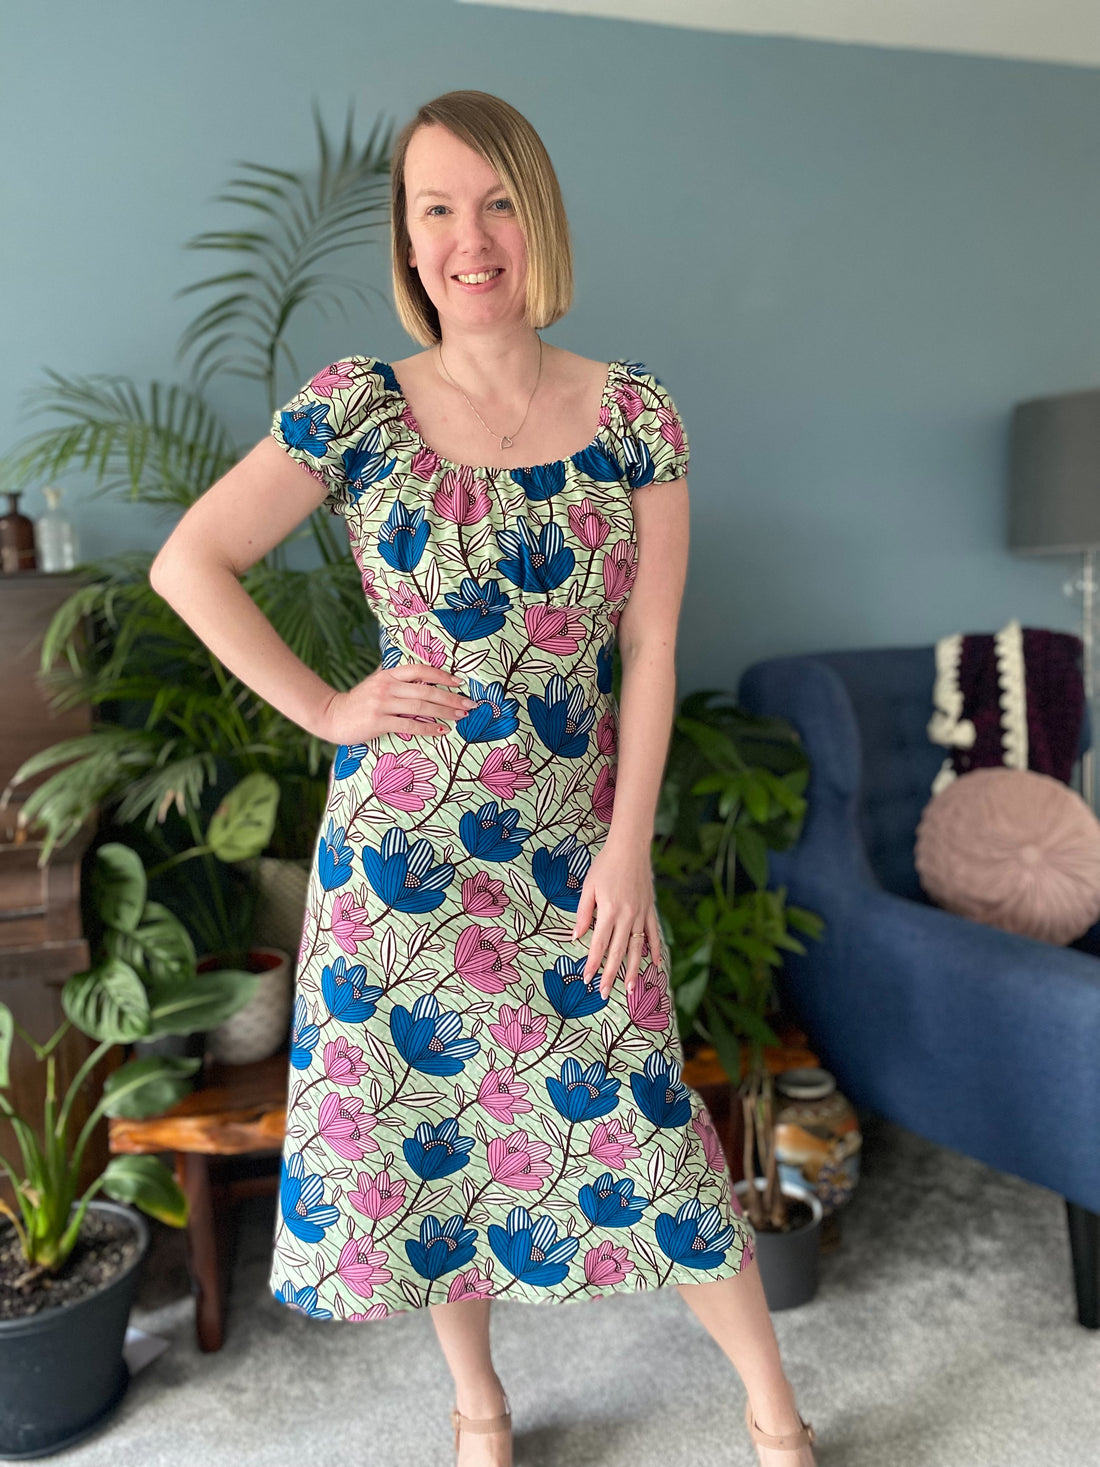 Adelle wearing the ‘Marianne Dress’ using the book ‘Sewing With African Wax Print Fabric’ by Adaku Parker made from the ‘Ankara’ African Wax print from Dovetailed London.